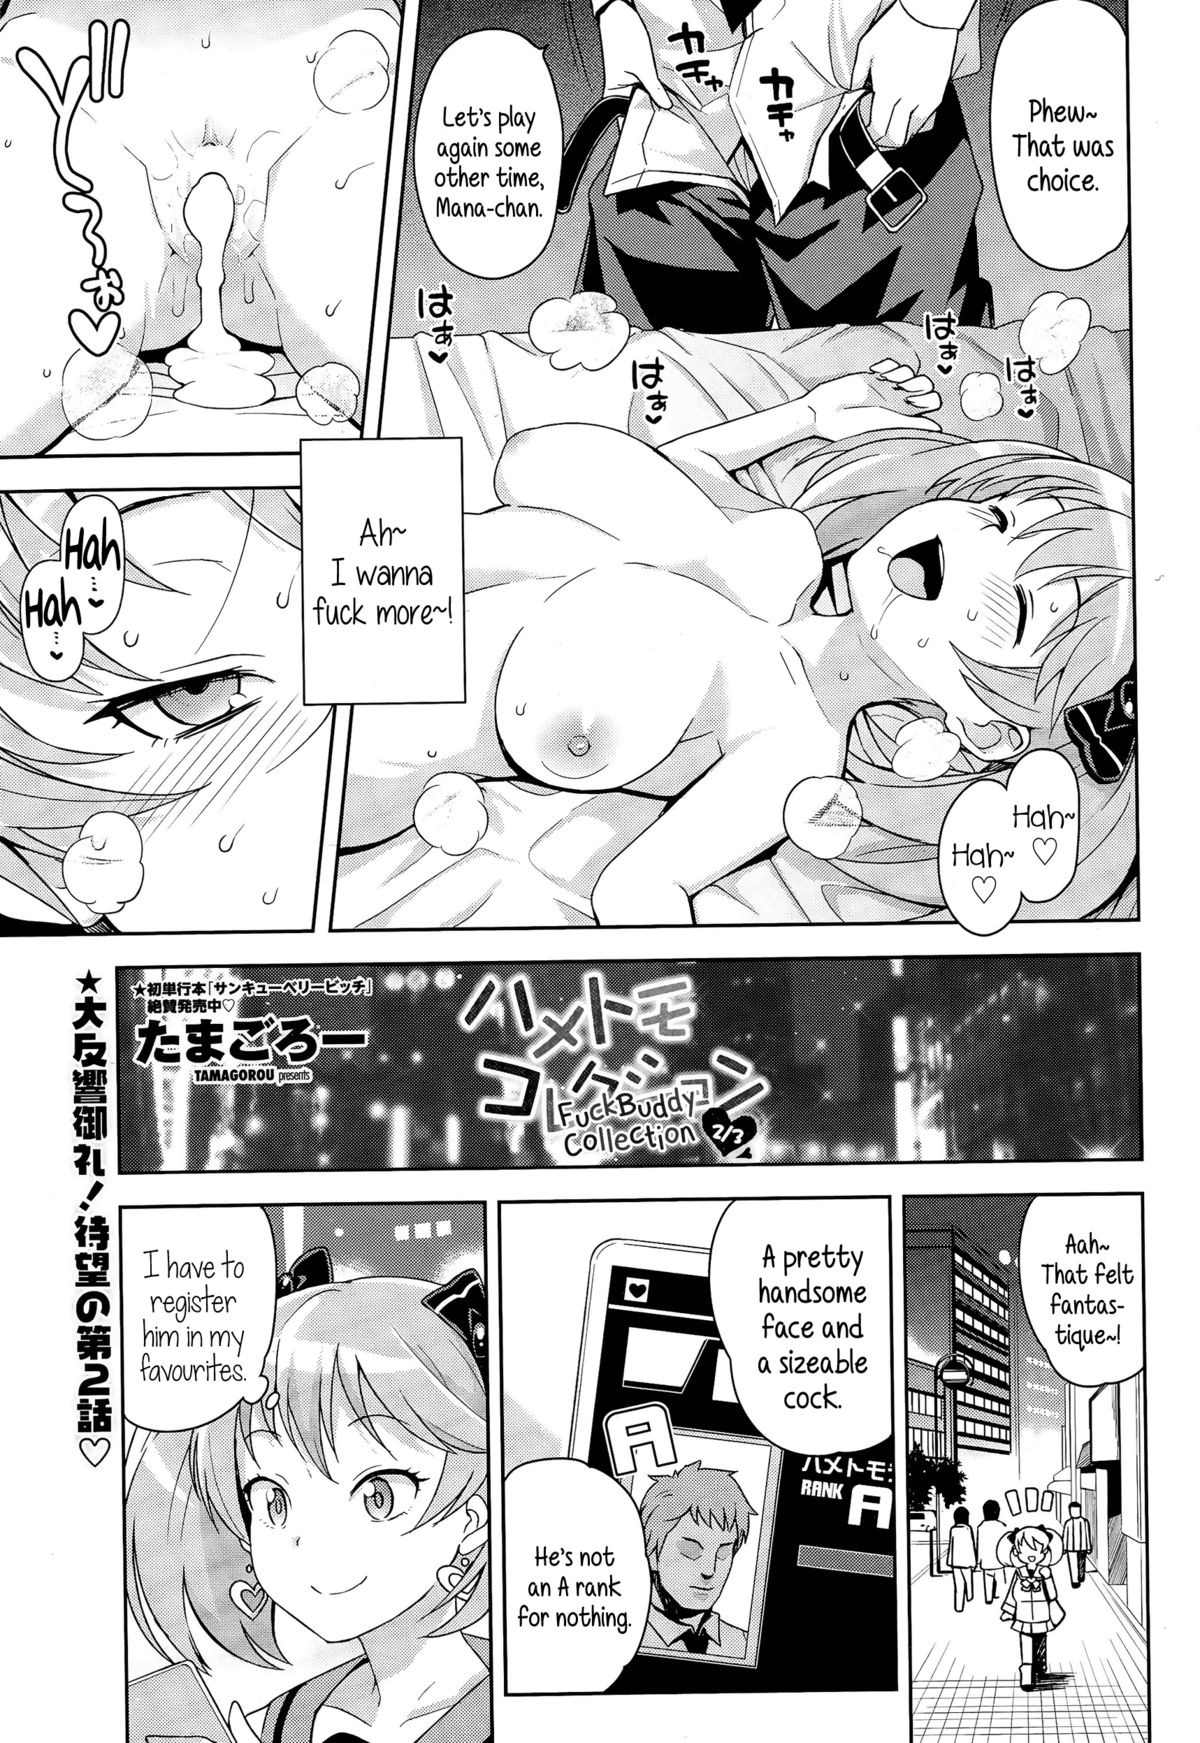 [Tamagoro] Hametomo Collection Ch. 1-2 | FuckBuddy Collection Ch. 1-2 [English] {5 a.m.} page 21 full